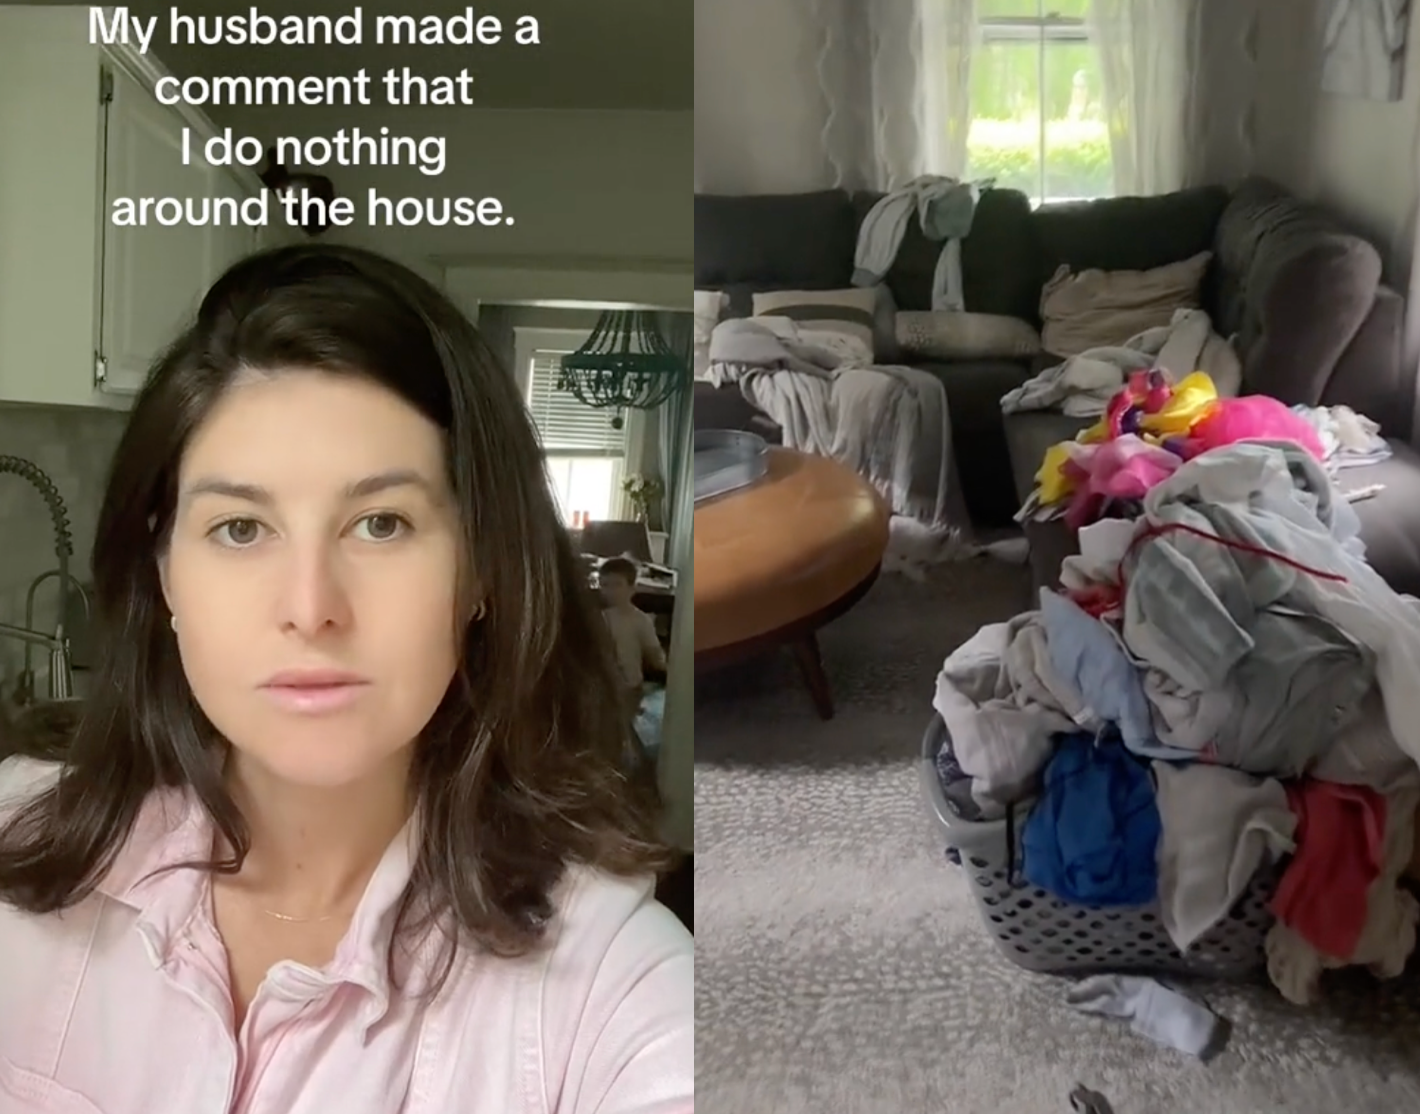 A Woman Stopped Tidying Up After Her Husband Accused Her Of Doing